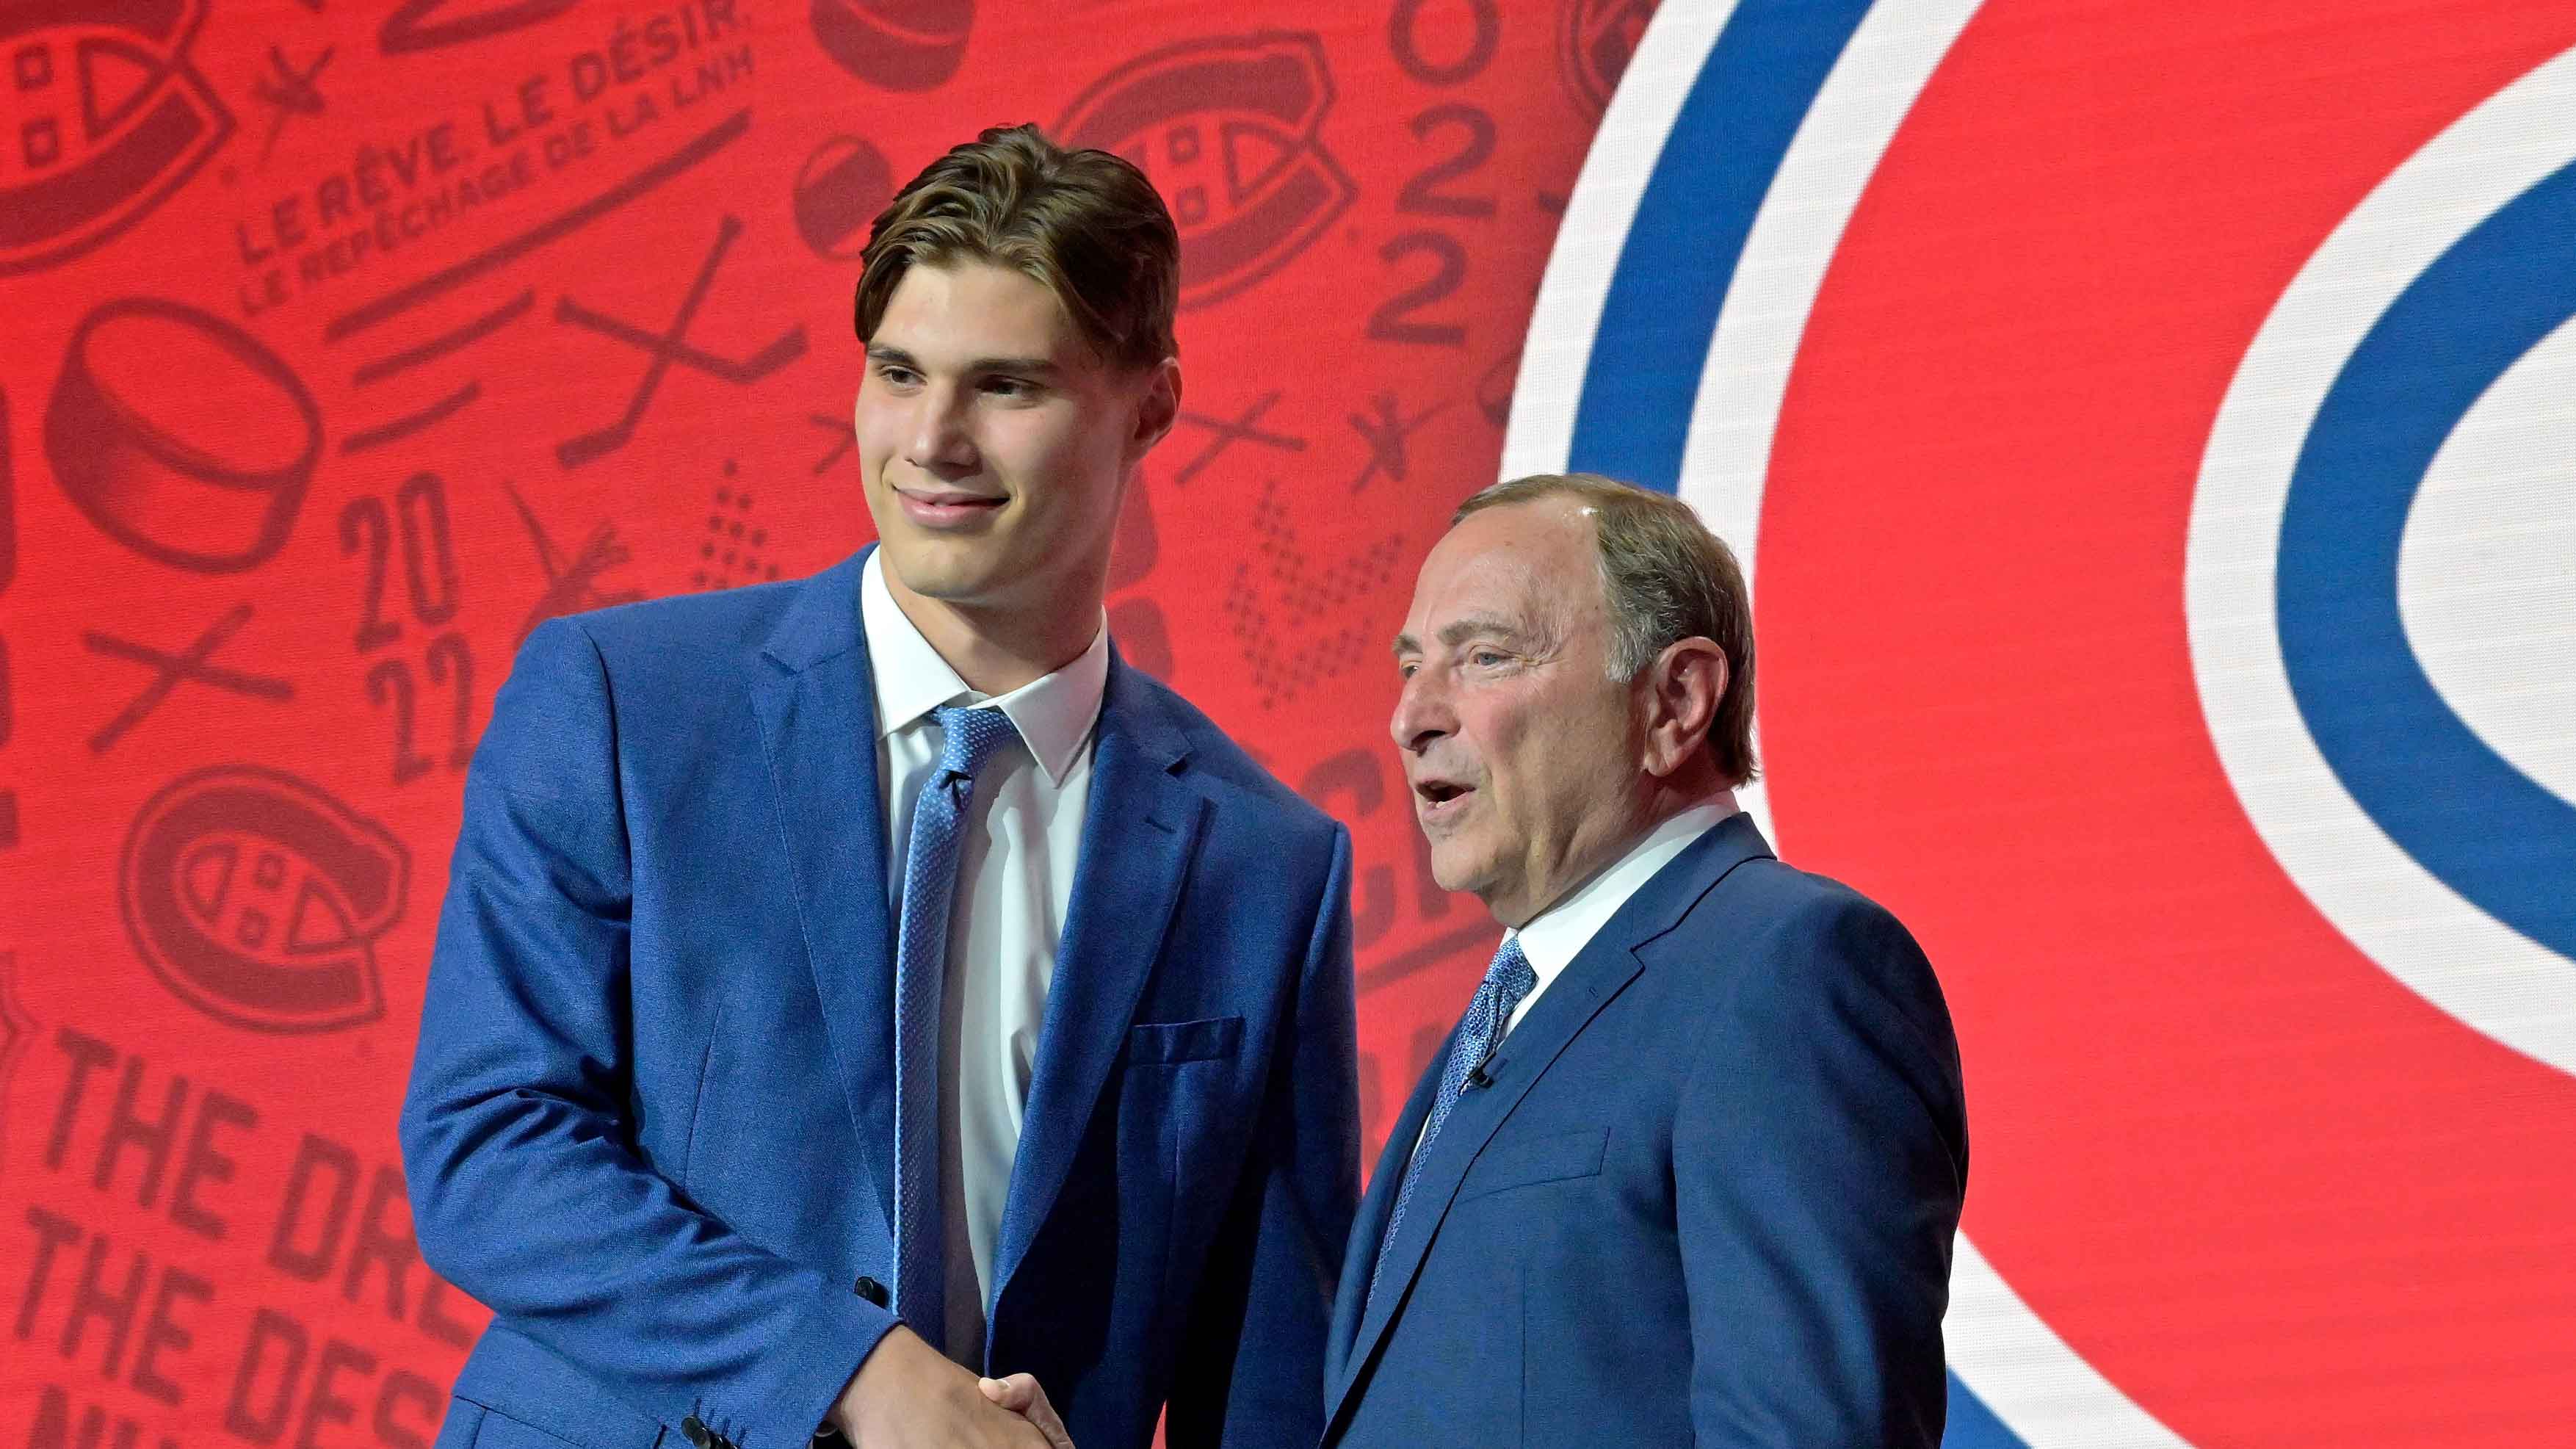 Blues select RW Jimmy Snuggerud with 23rd pick in 2022 NHL draft